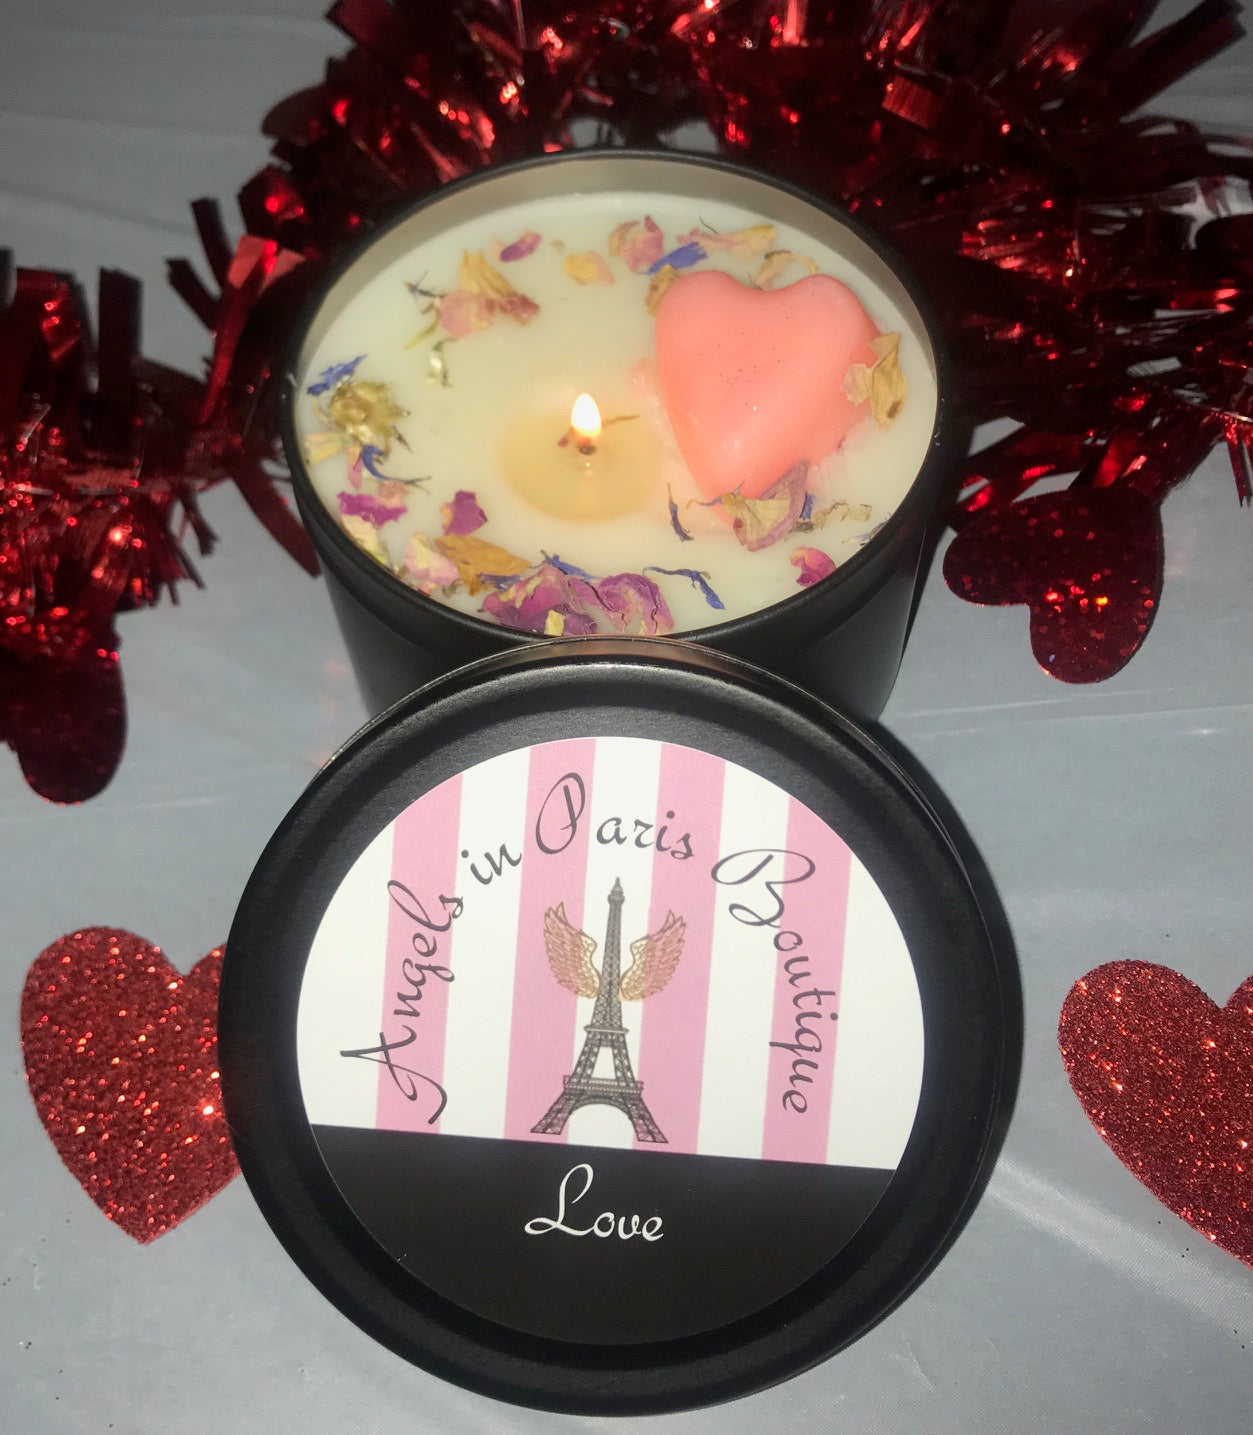 Wax and Oils Soy Wax Aromatherapy Scented Candles (Love) 8 Ounces. Single